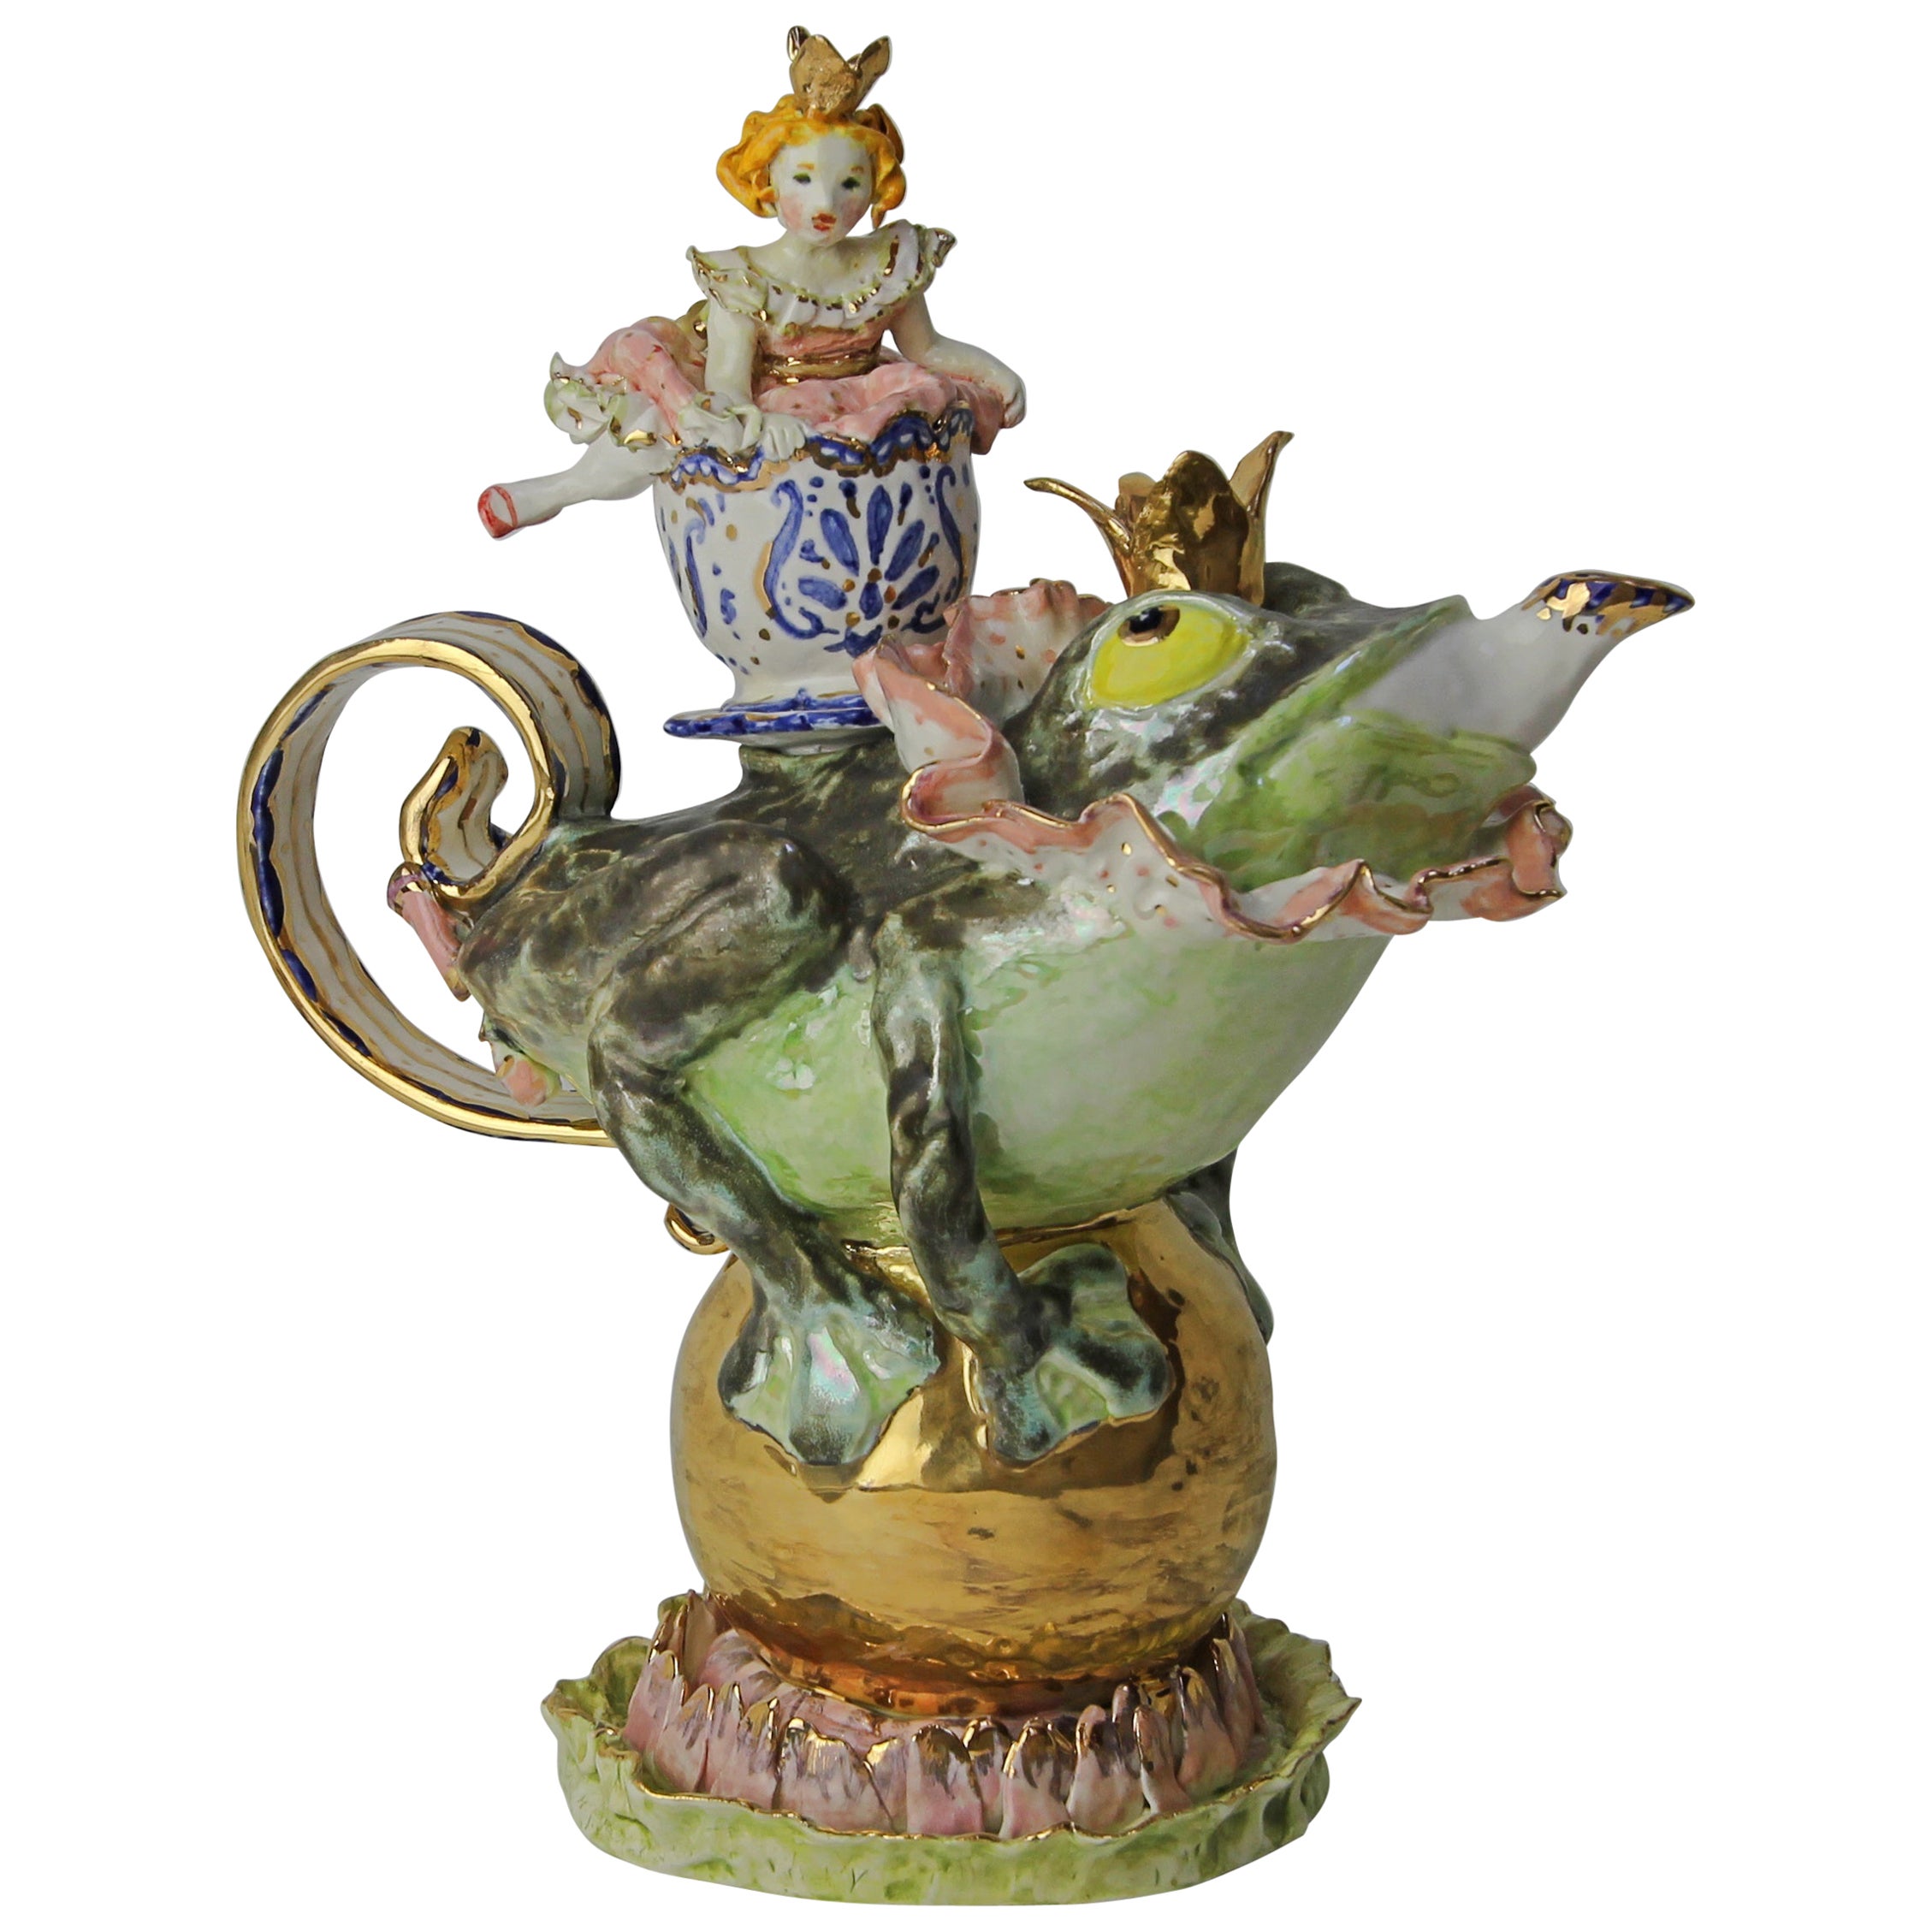 The Frog Prince Porcelain Piece, Handmade in Italy, Handcrafted Design 2021